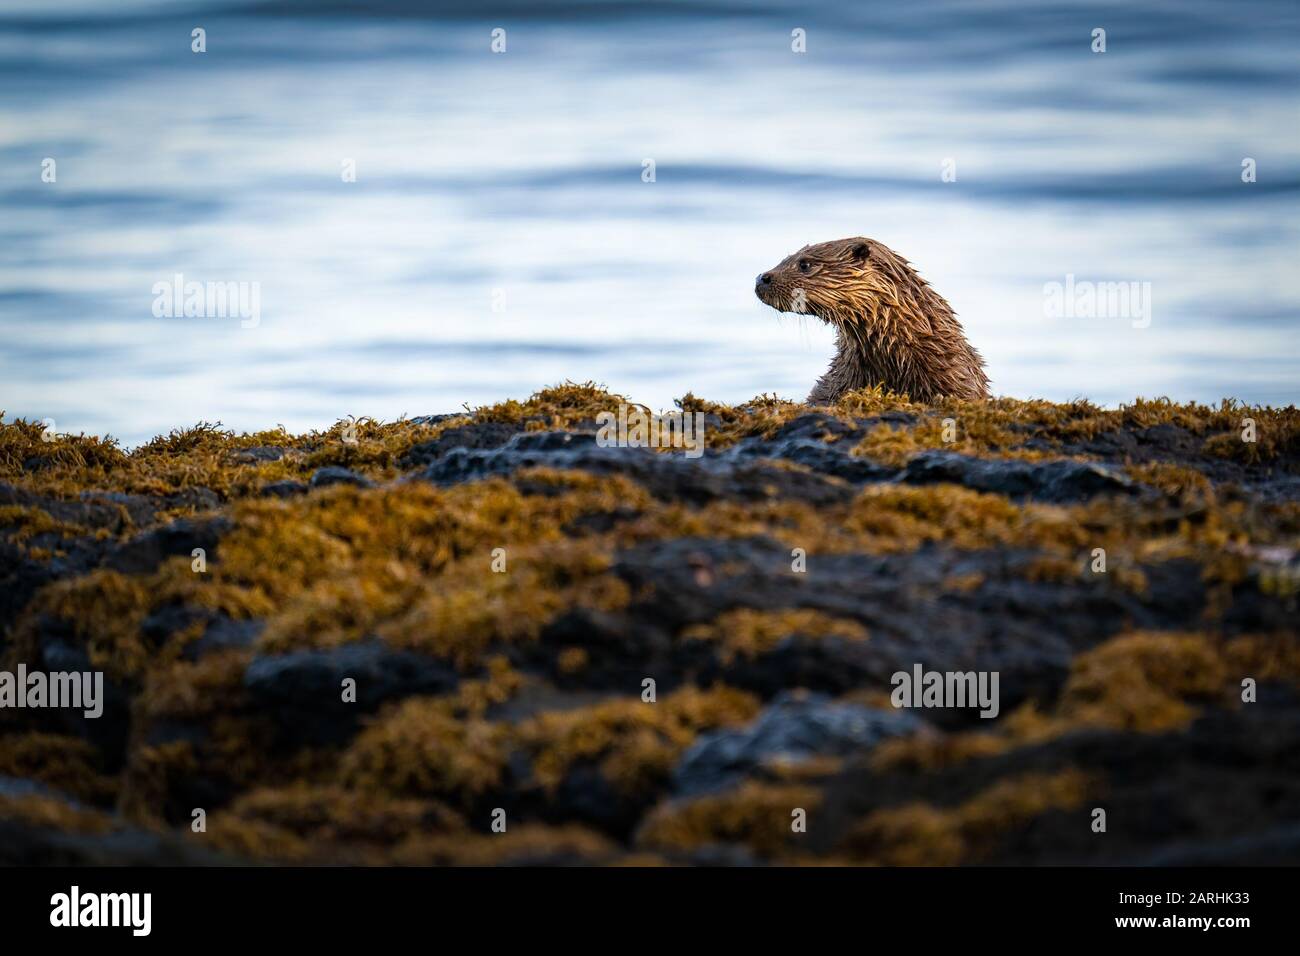 Young Otter (Lutra lutra) cub or kit on a rocky shore waiting for it's mother to return with food, Scotland UK Stock Photo